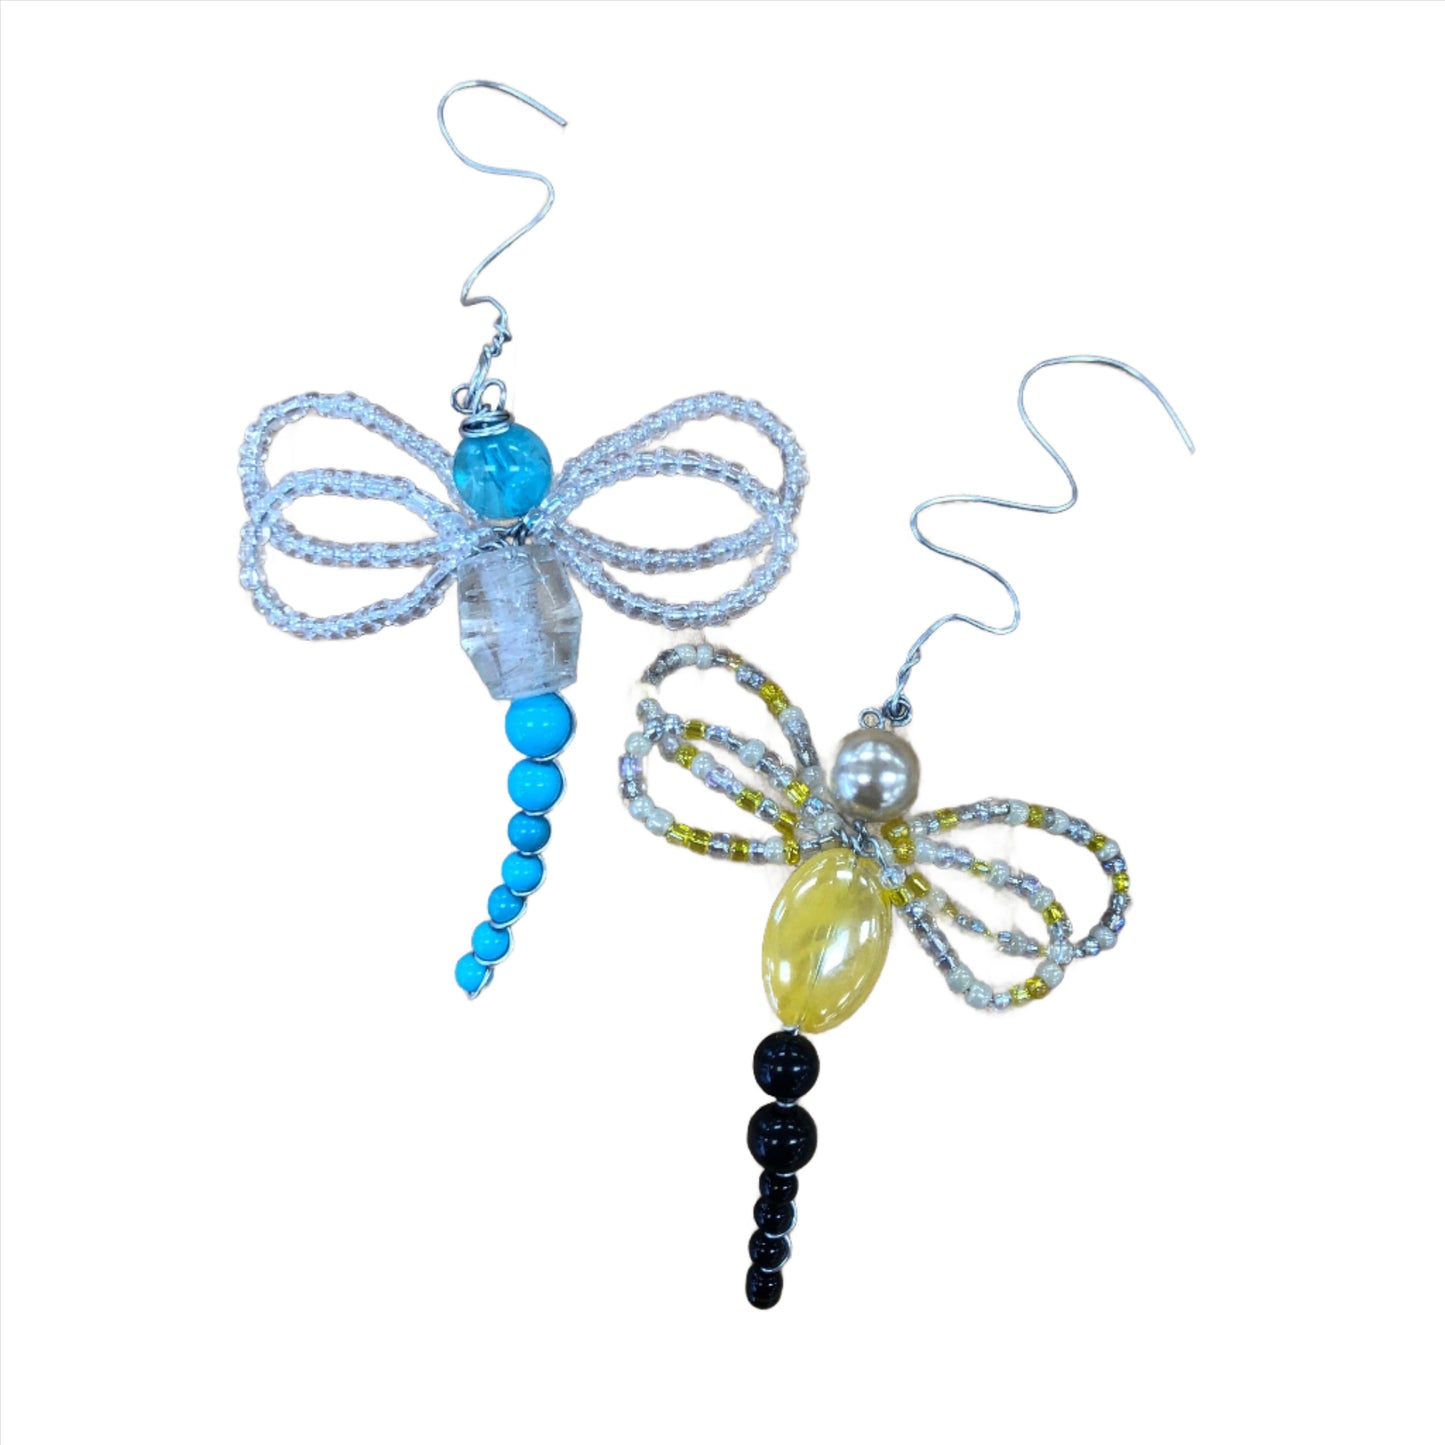 05/11/24 Dragonflies With Mom Class 2-4pm